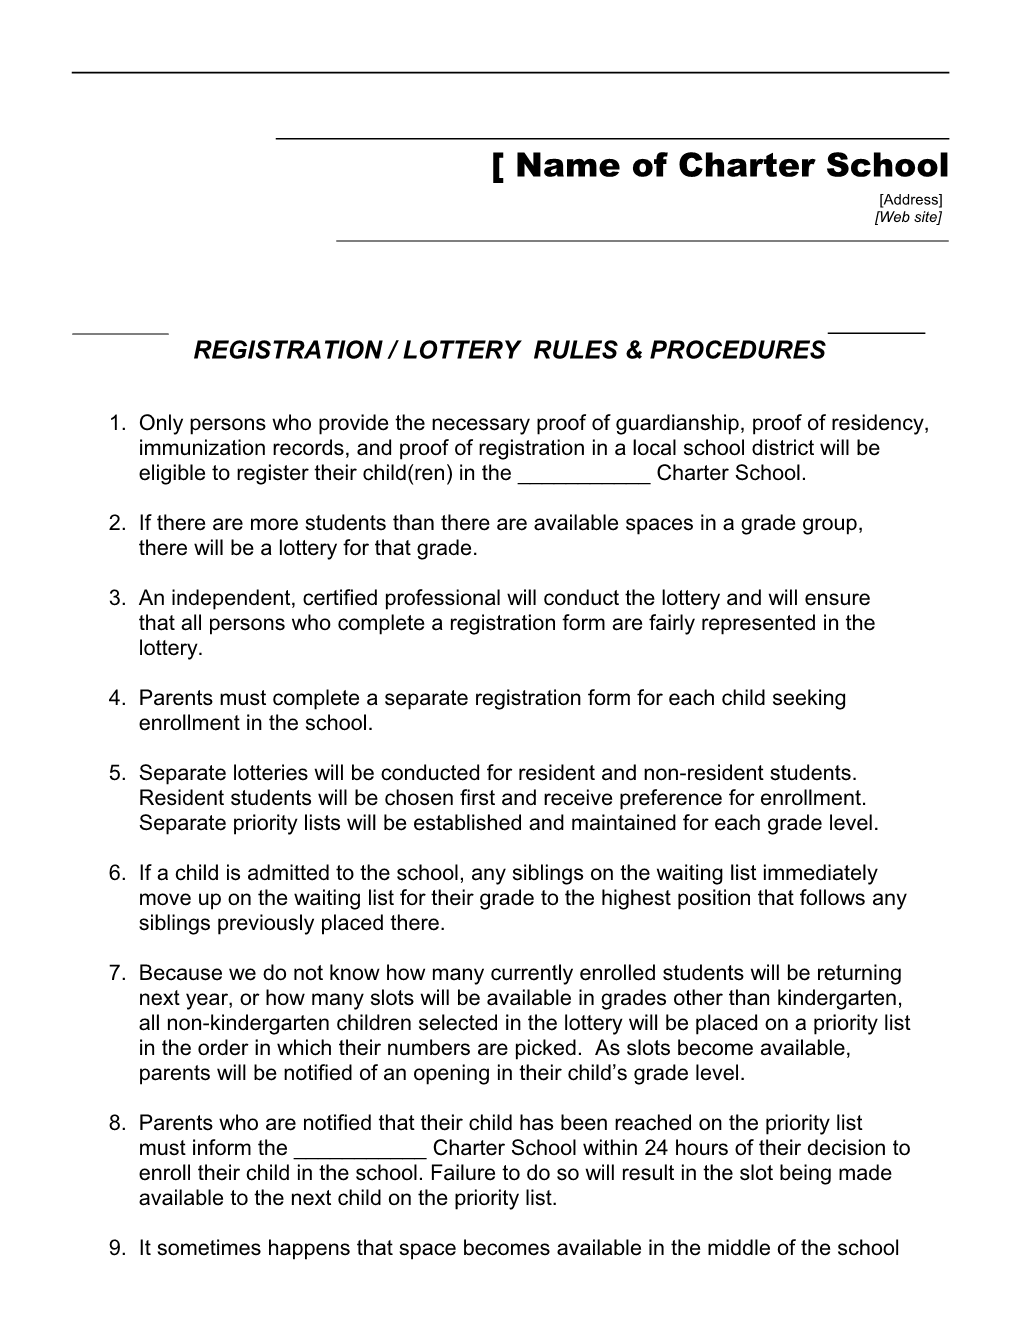 Registration / Lottery Rules & Procedures